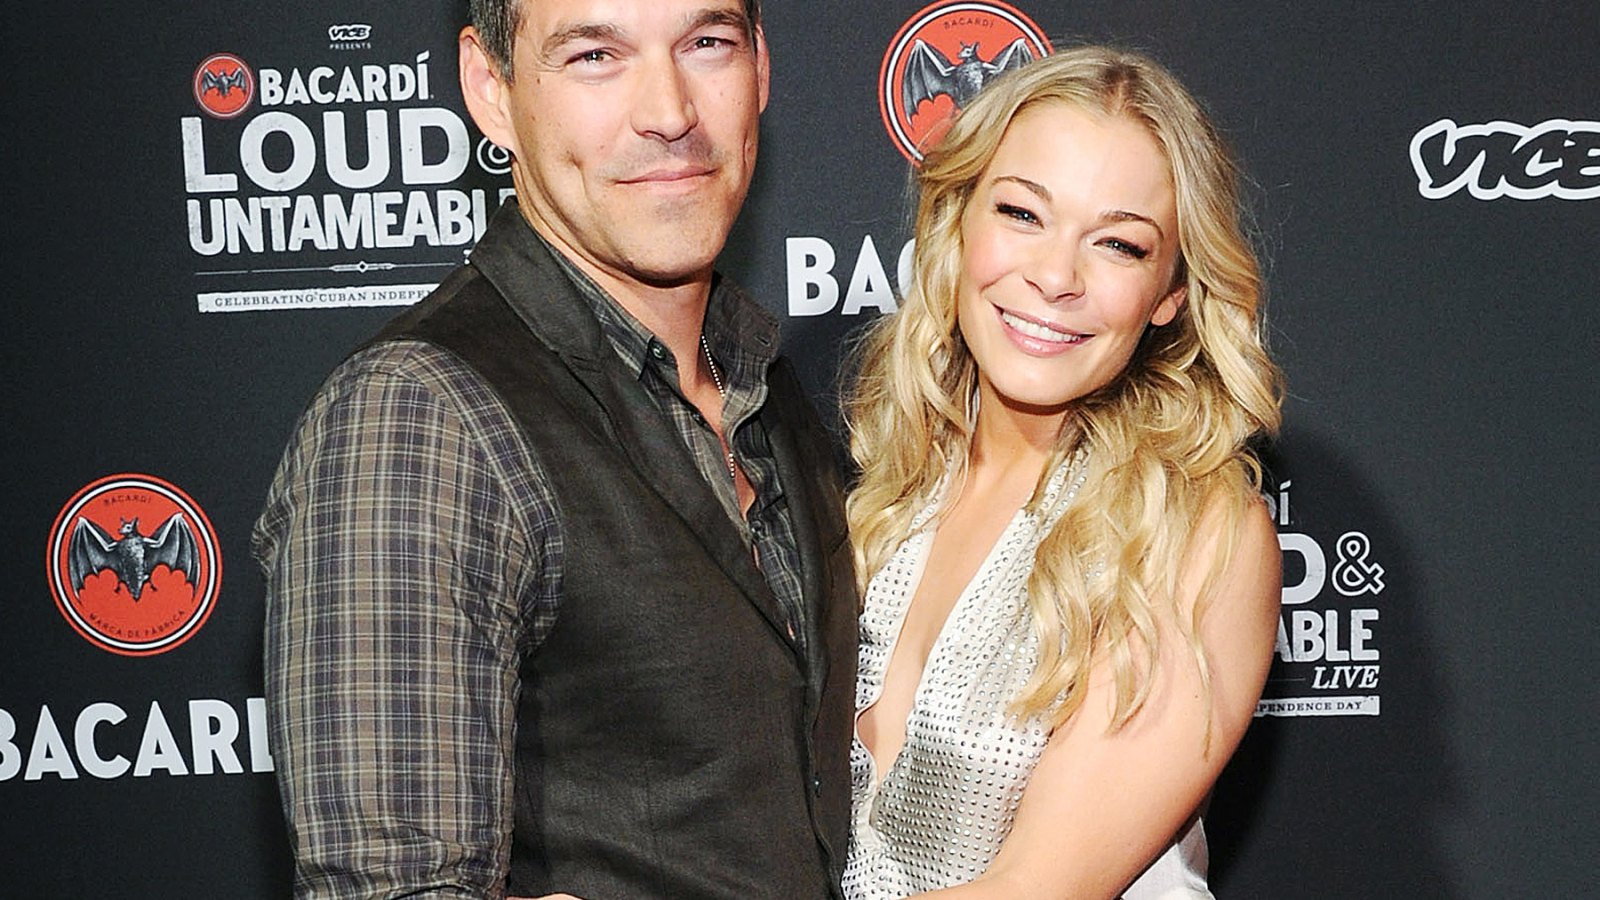 LeAnn Rimes and Eddie Cibrian attend an event on May 20, 2014